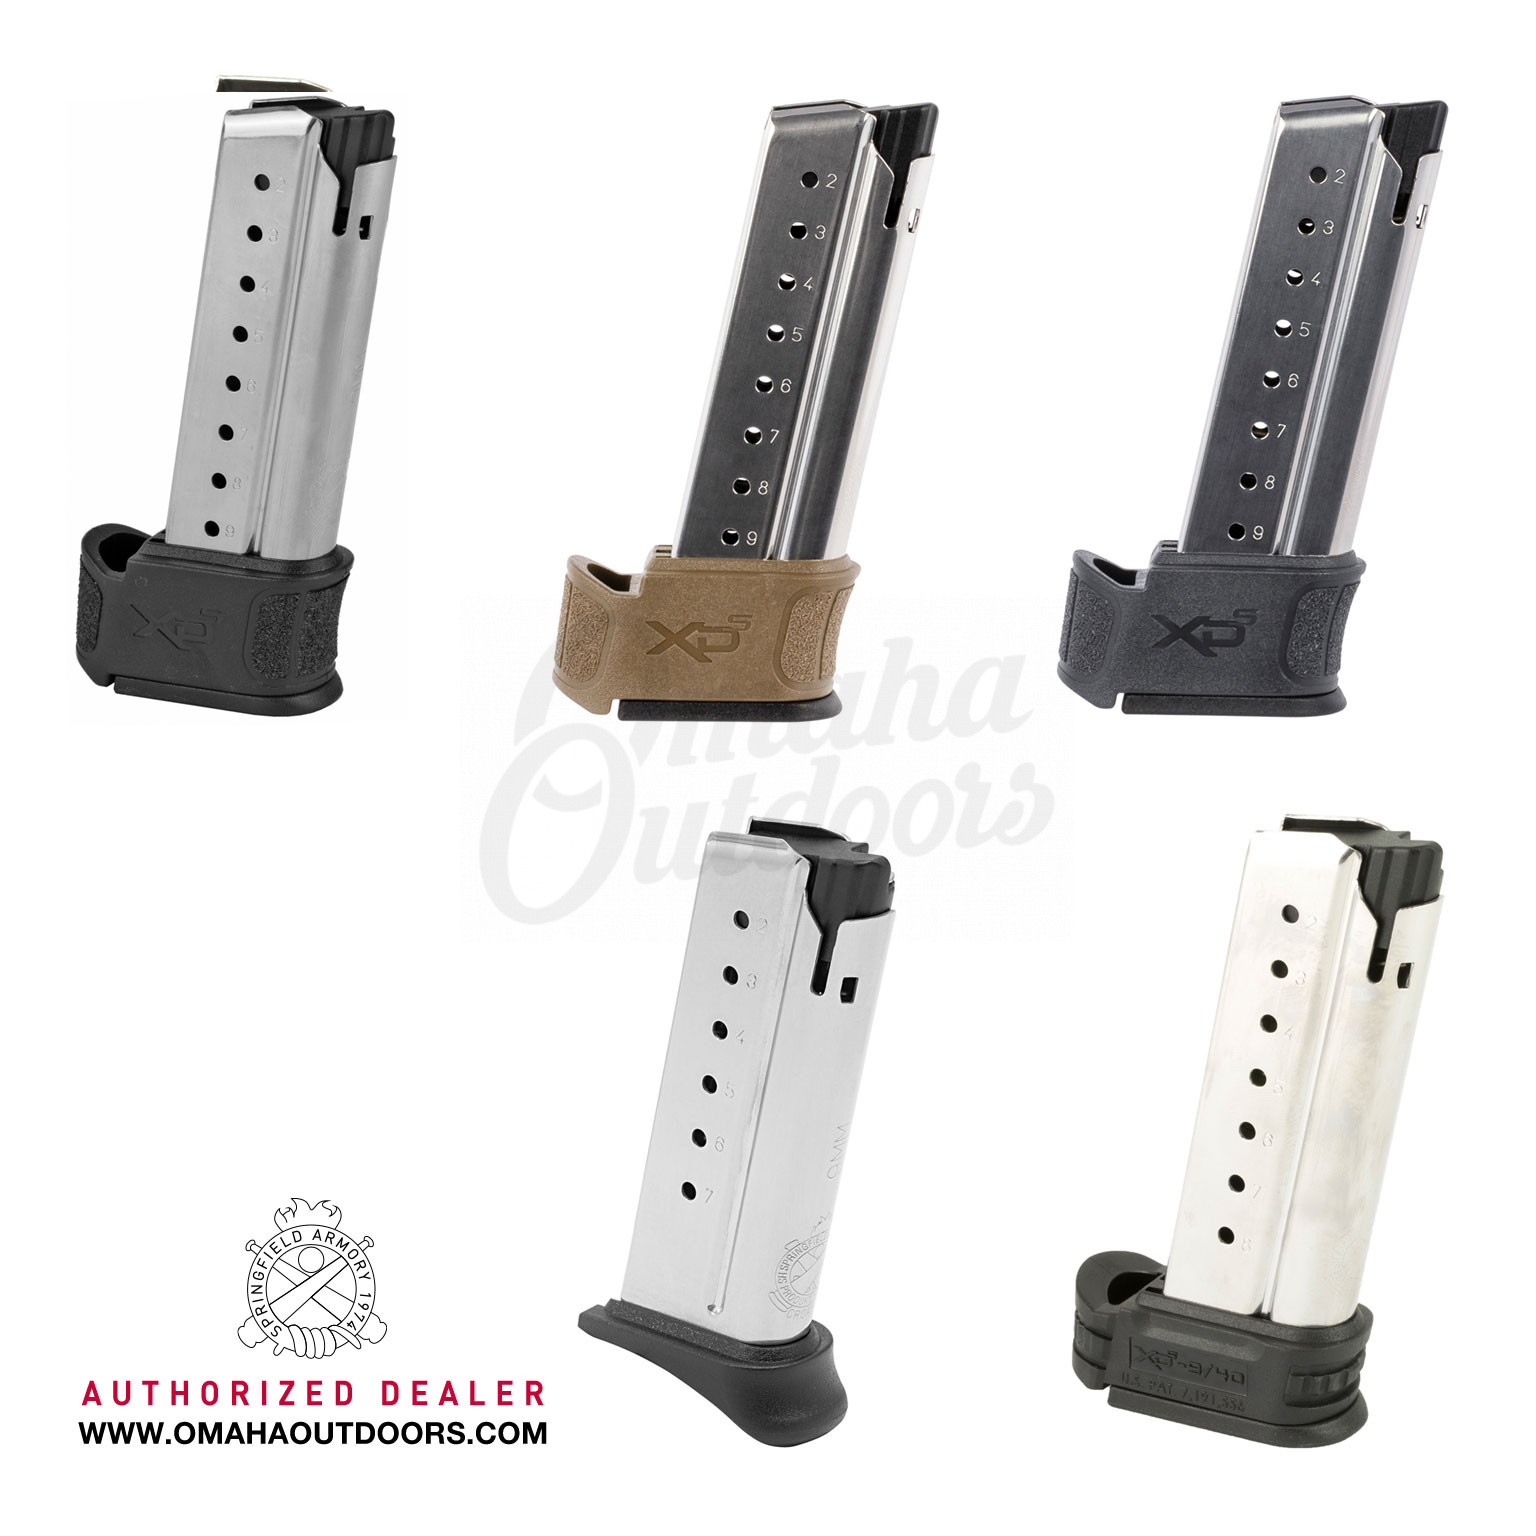 Springfield Armory XDS Mod2 FDE 9mm 9 Round Magazine for sale online